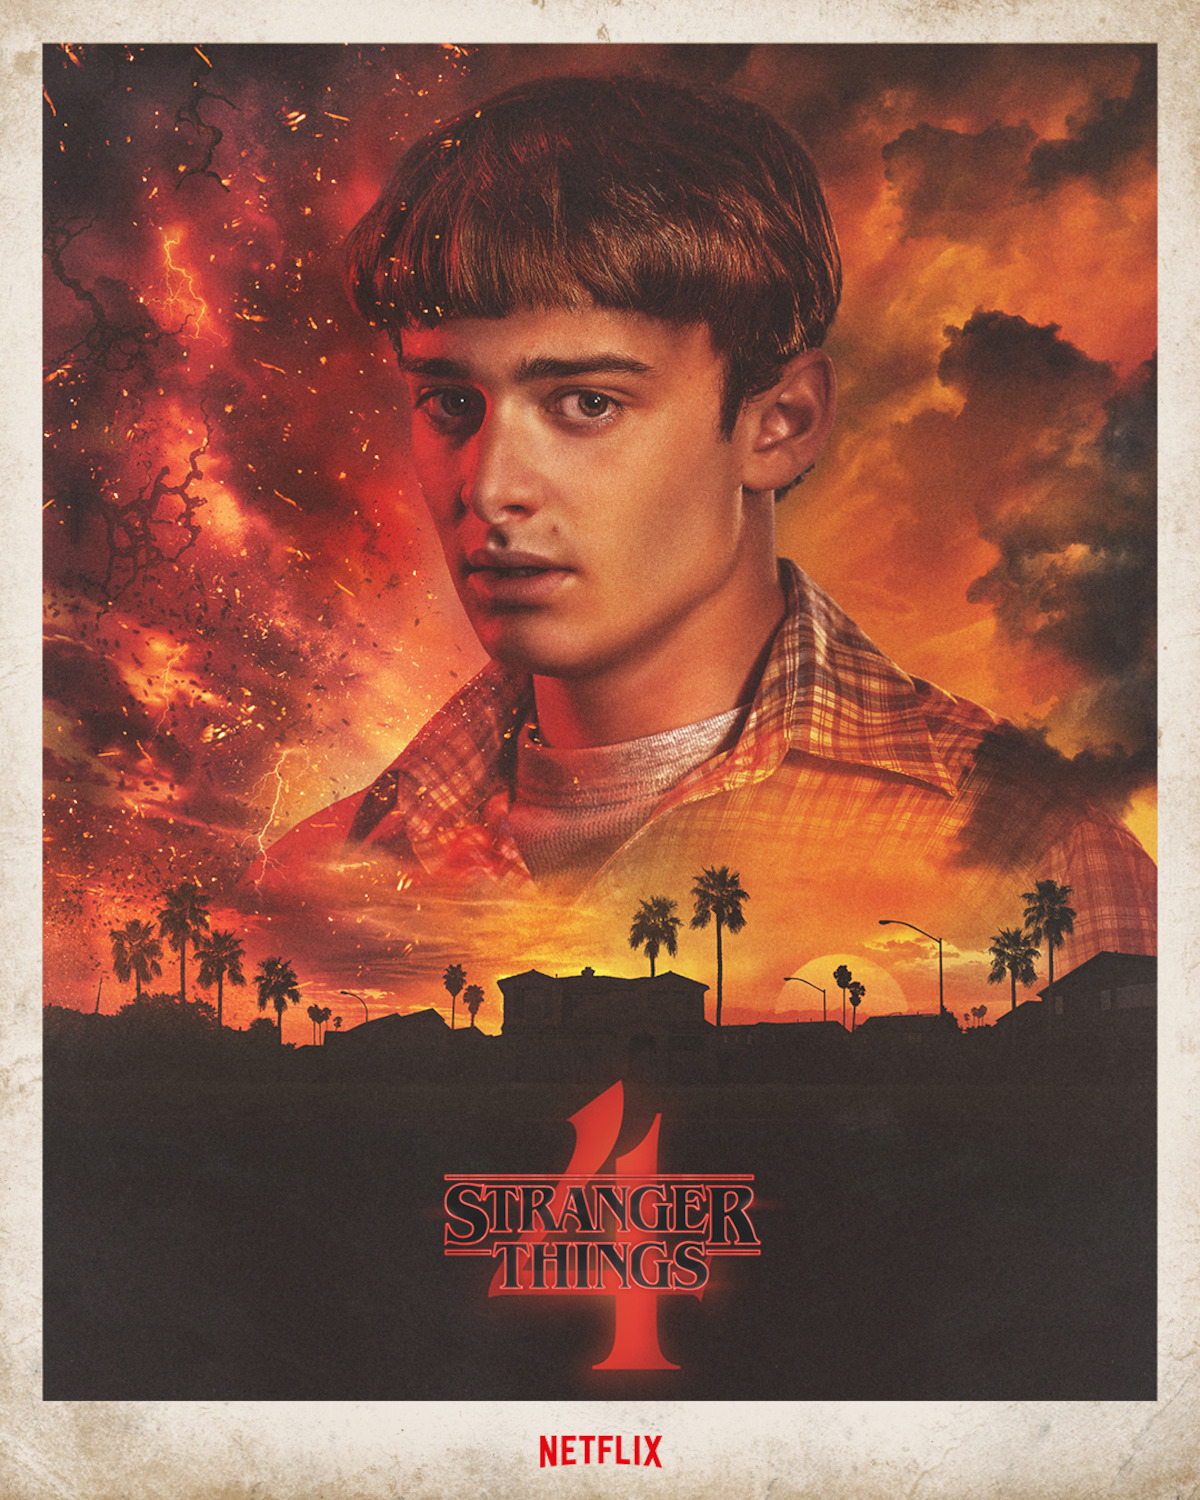 Will - The Byers Family Finds Trouble in California in New ‘Stranger Things 4’ Posters